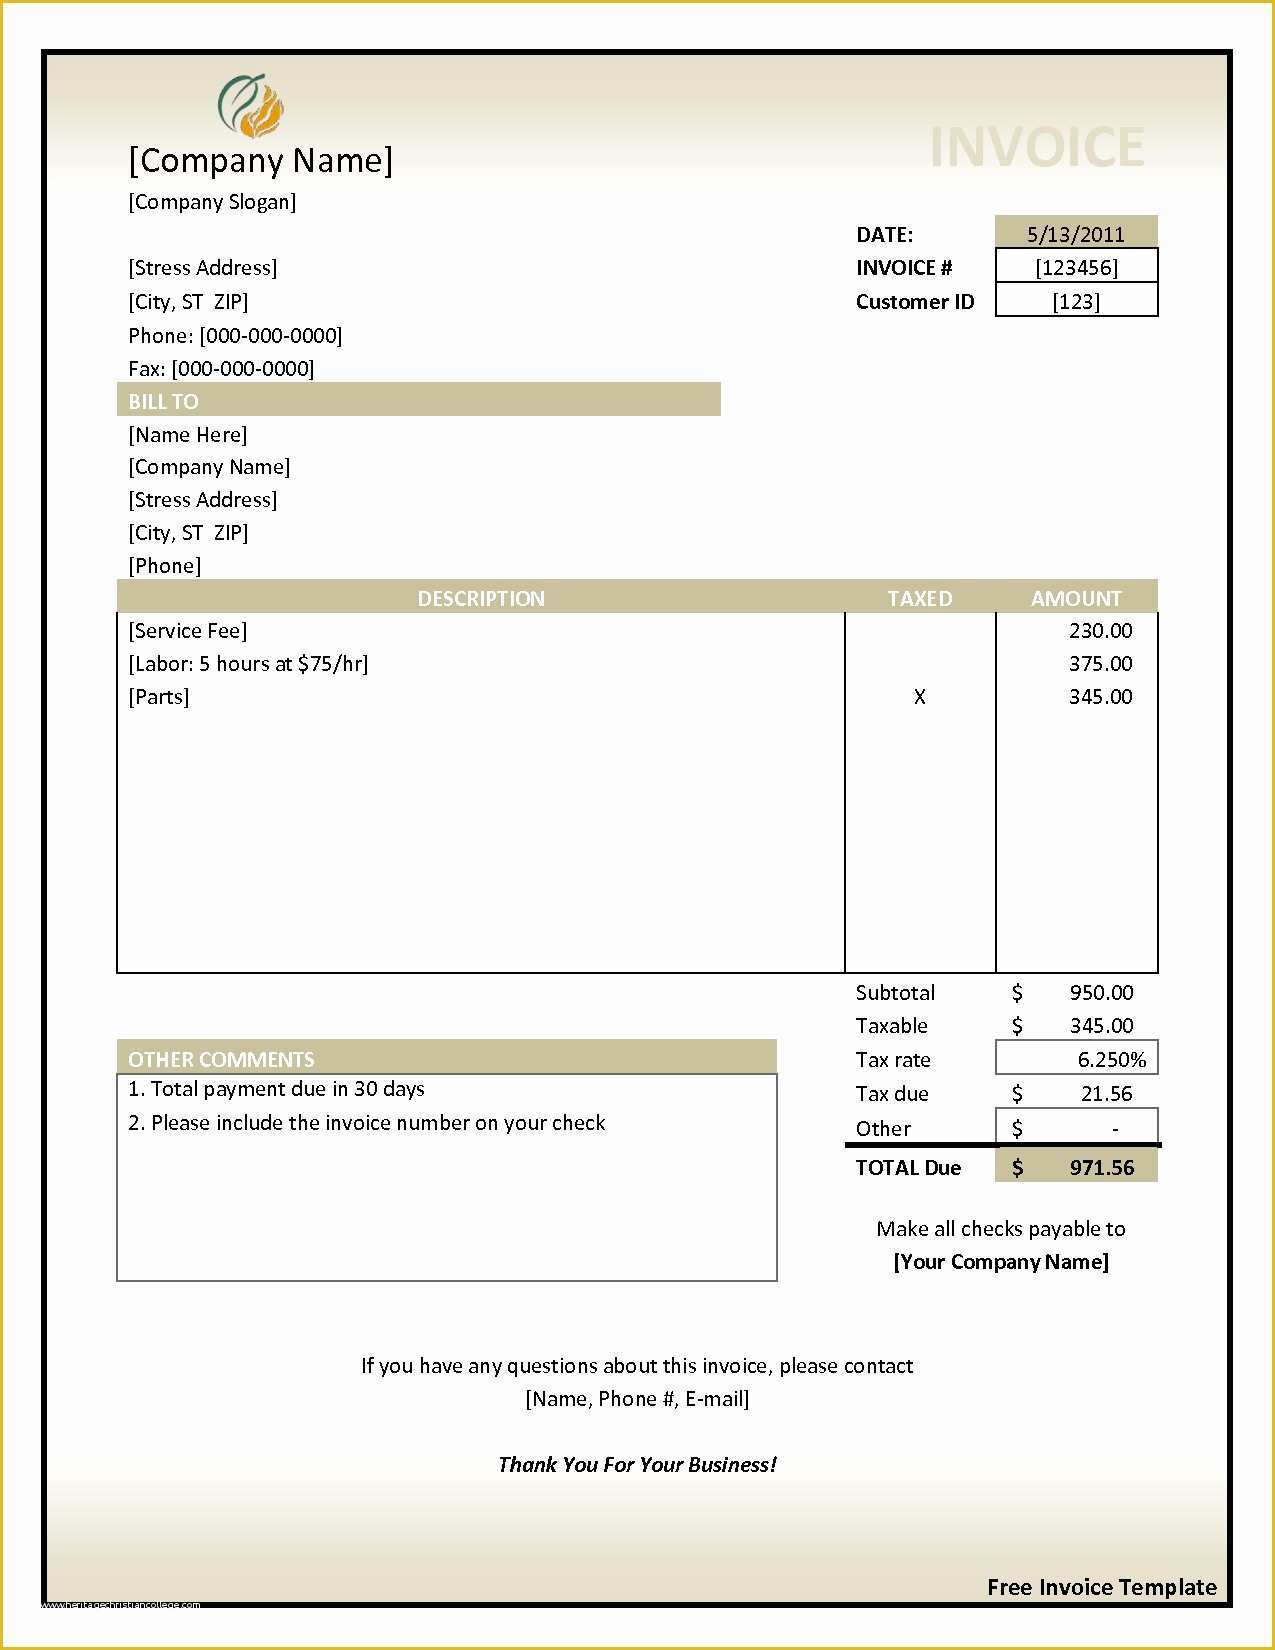 Free Invoice Template Download Of Sample Medical Invoice Invoice Template Ideas